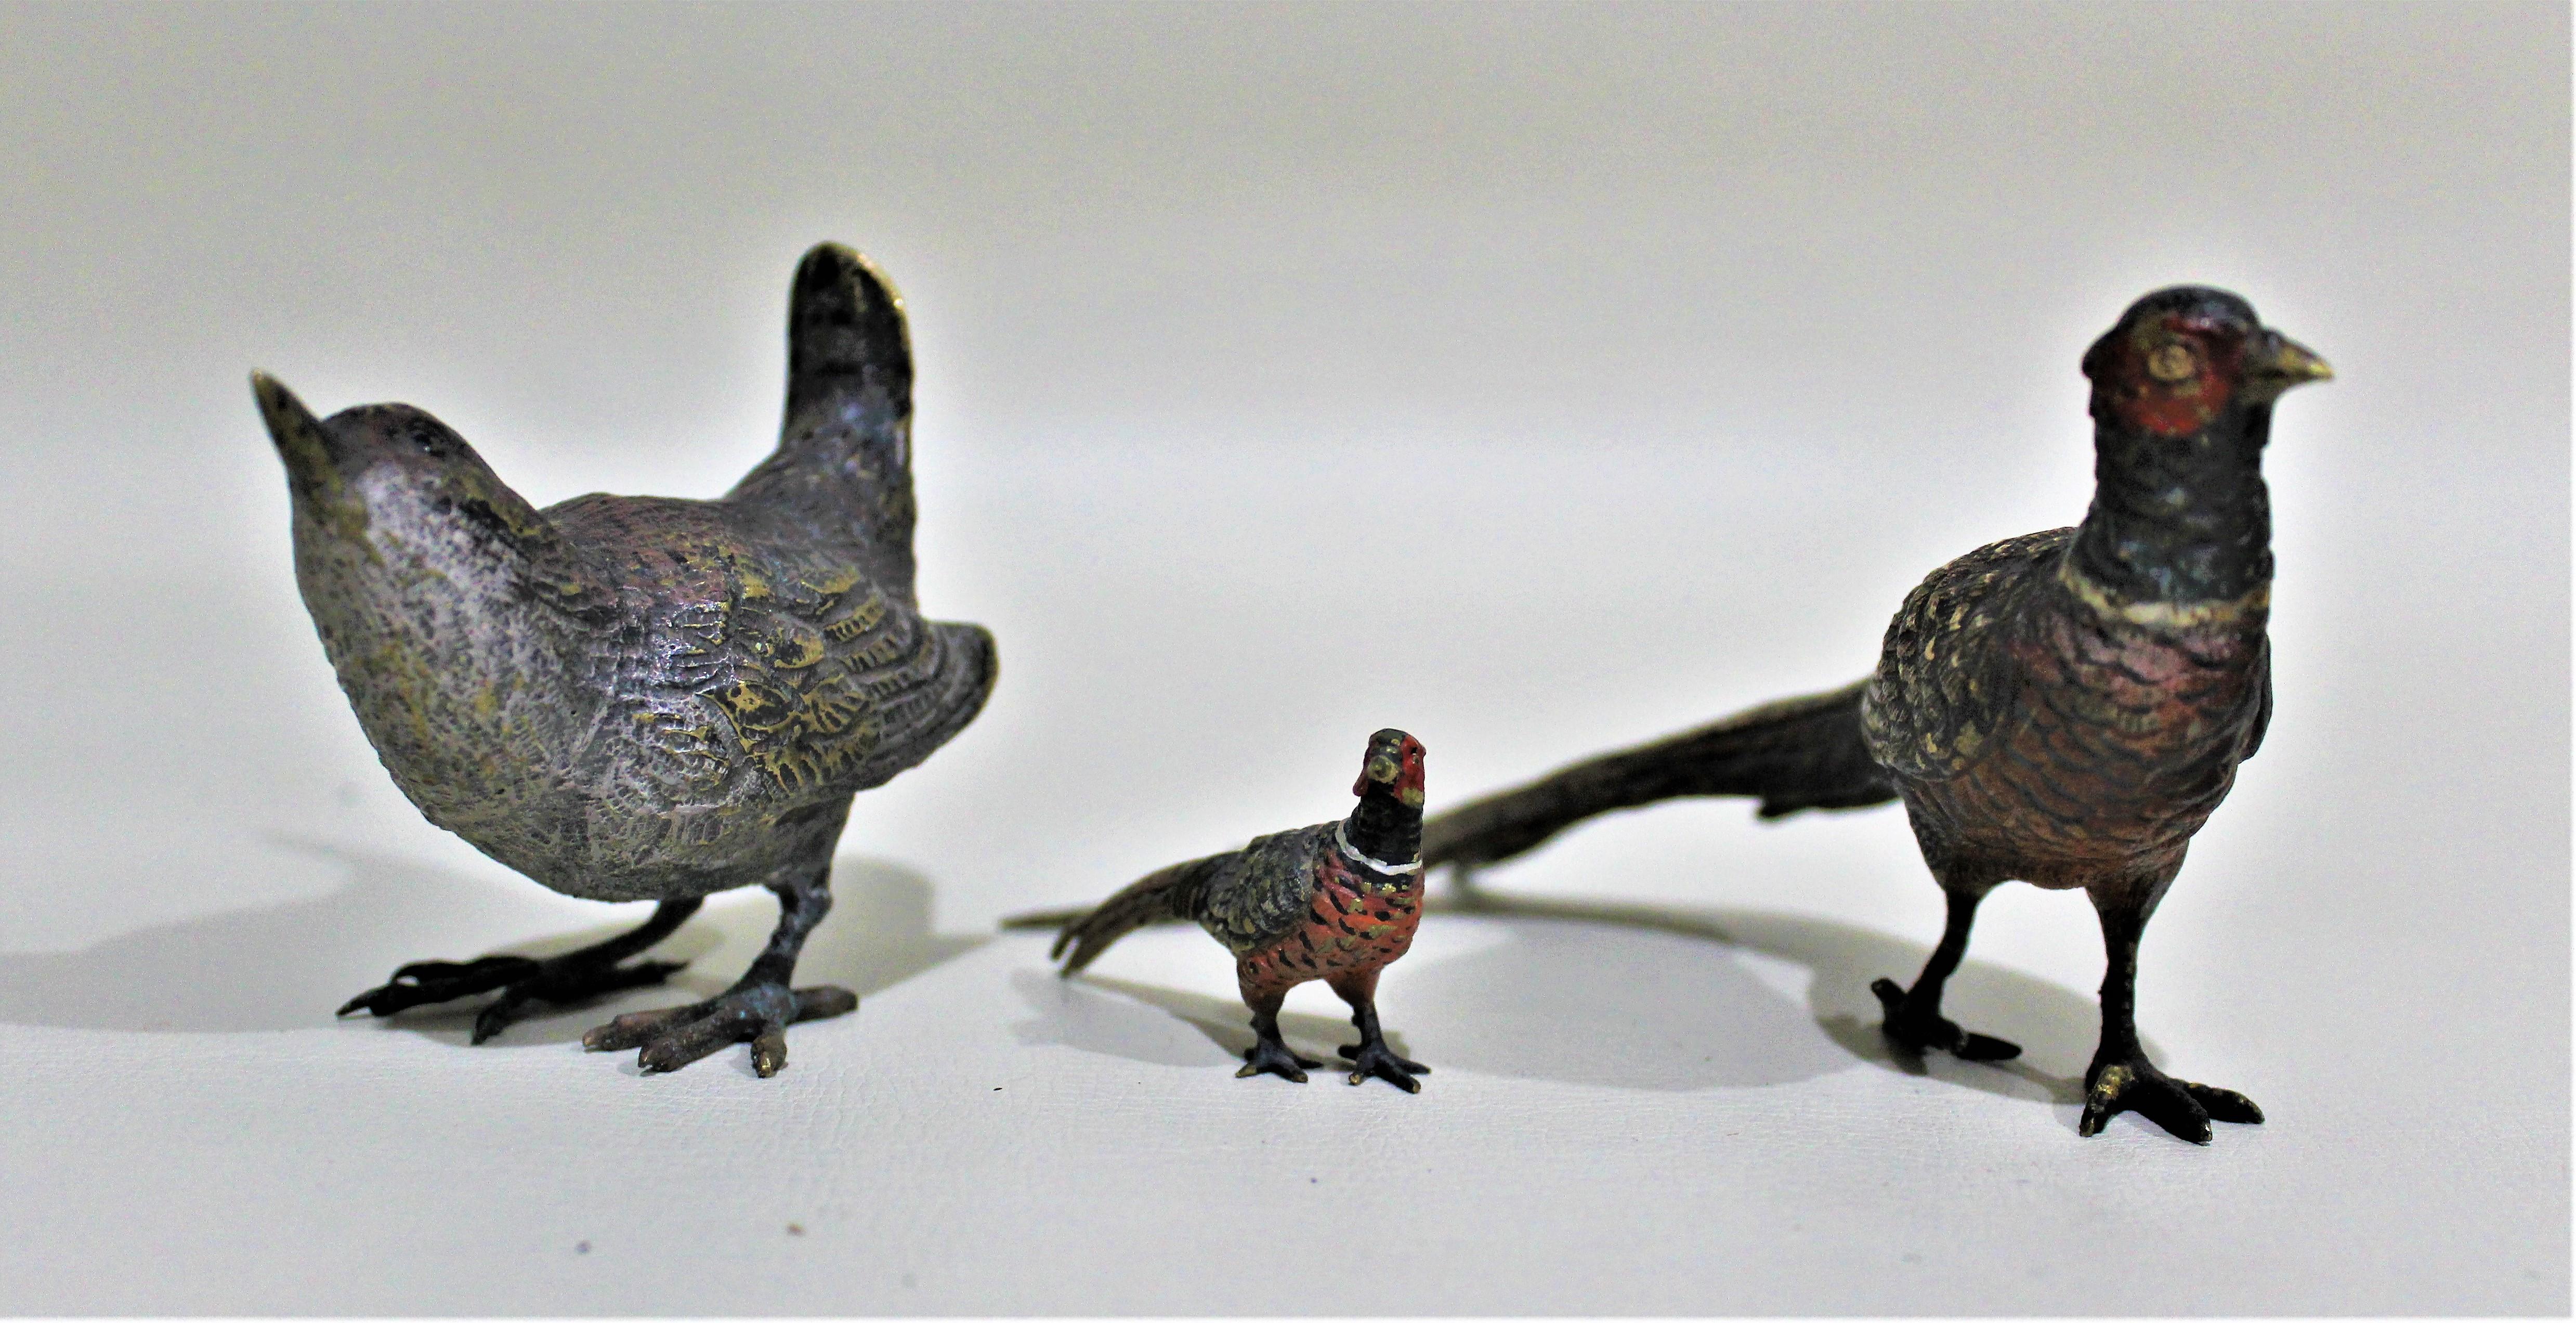 Lot of three detailed cast and cold-painted Austrian bronze bird figures dating from approximately the 1900-1920s time period. The cast figurines are highly detailed showing, for example, individual feathers and are cold painted in a realistic